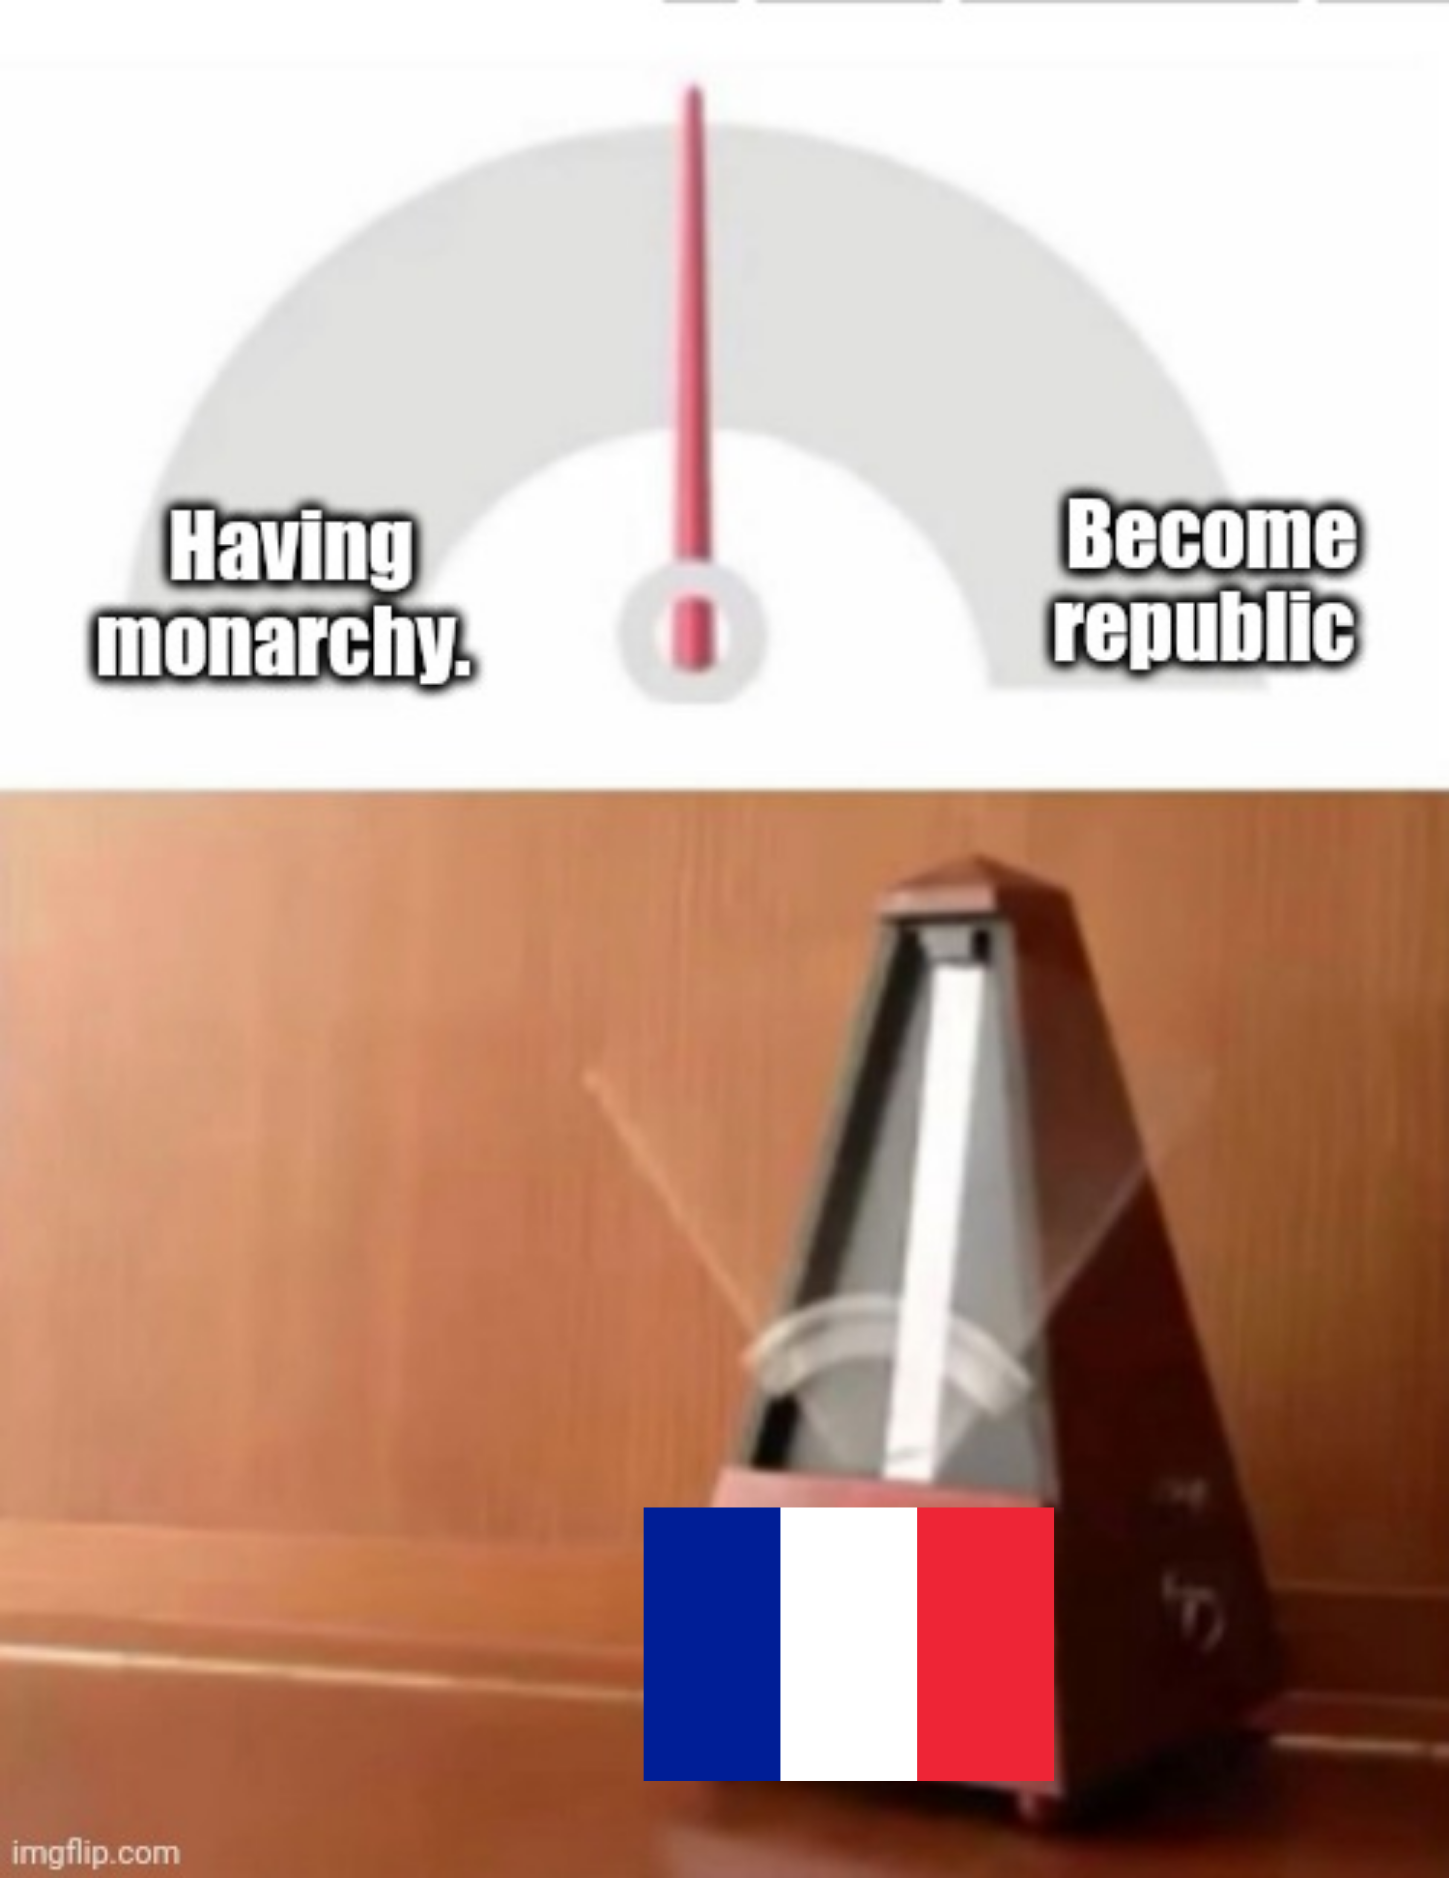 France 18-19th century in a nutshell.